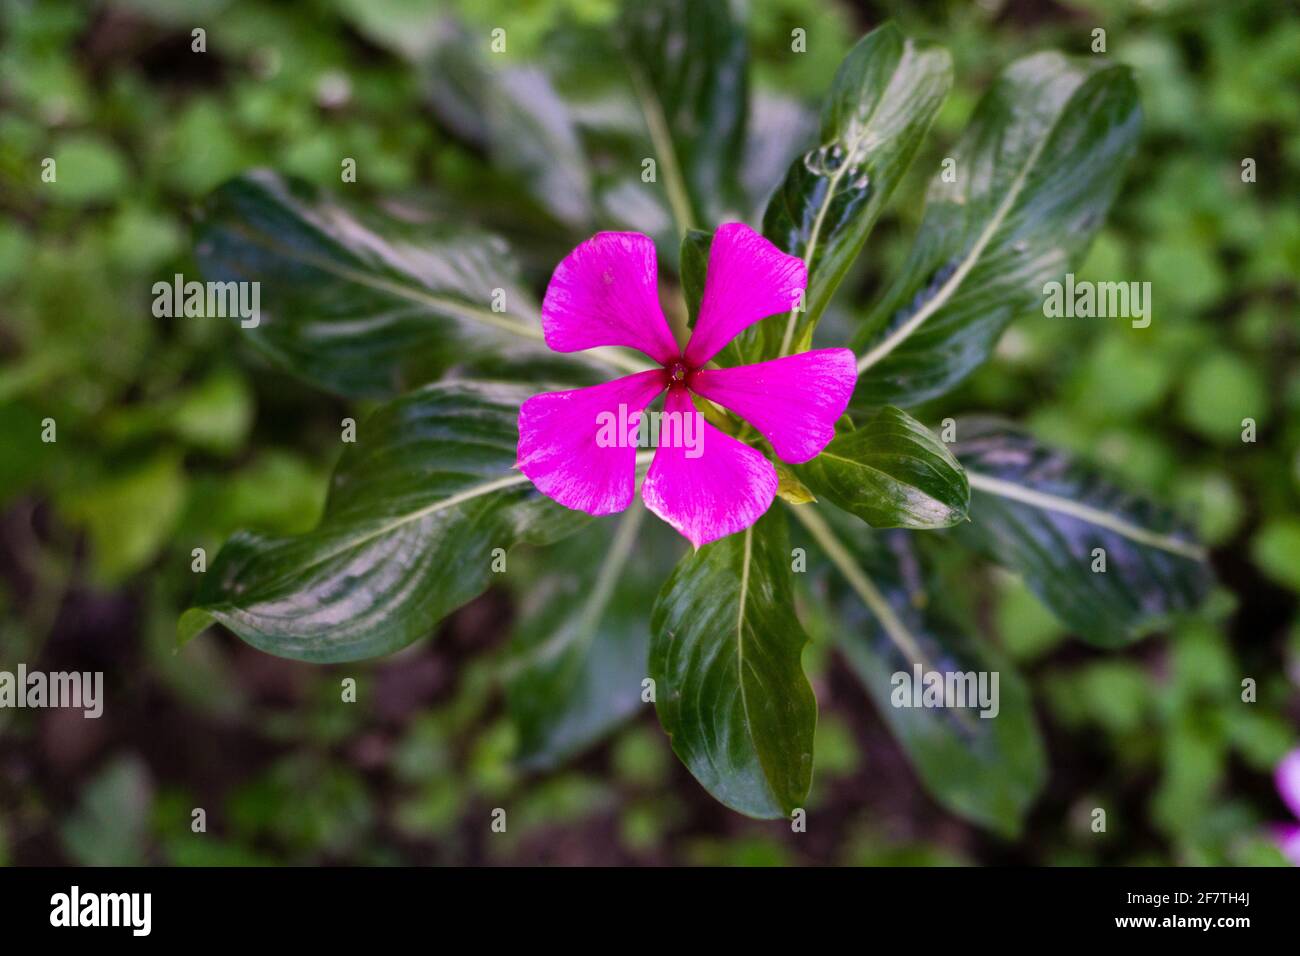 Madagascar Periwinkle, Catharanthus roseus, commonly known as bright eyes,is a species of flowering plant in the family Apocynaceae. Stock Photo